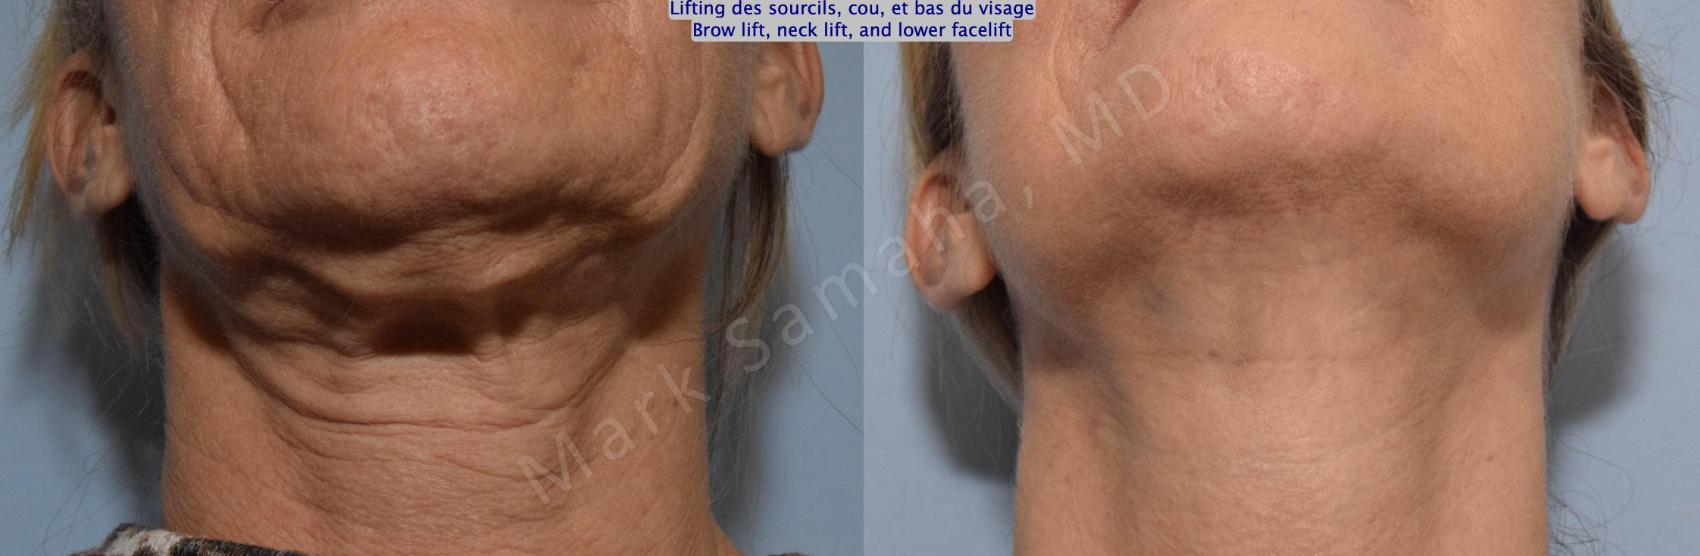 Before & After Lifting du Sourcil / Brow lift Case 145 Neckcou View in Montreal, QC